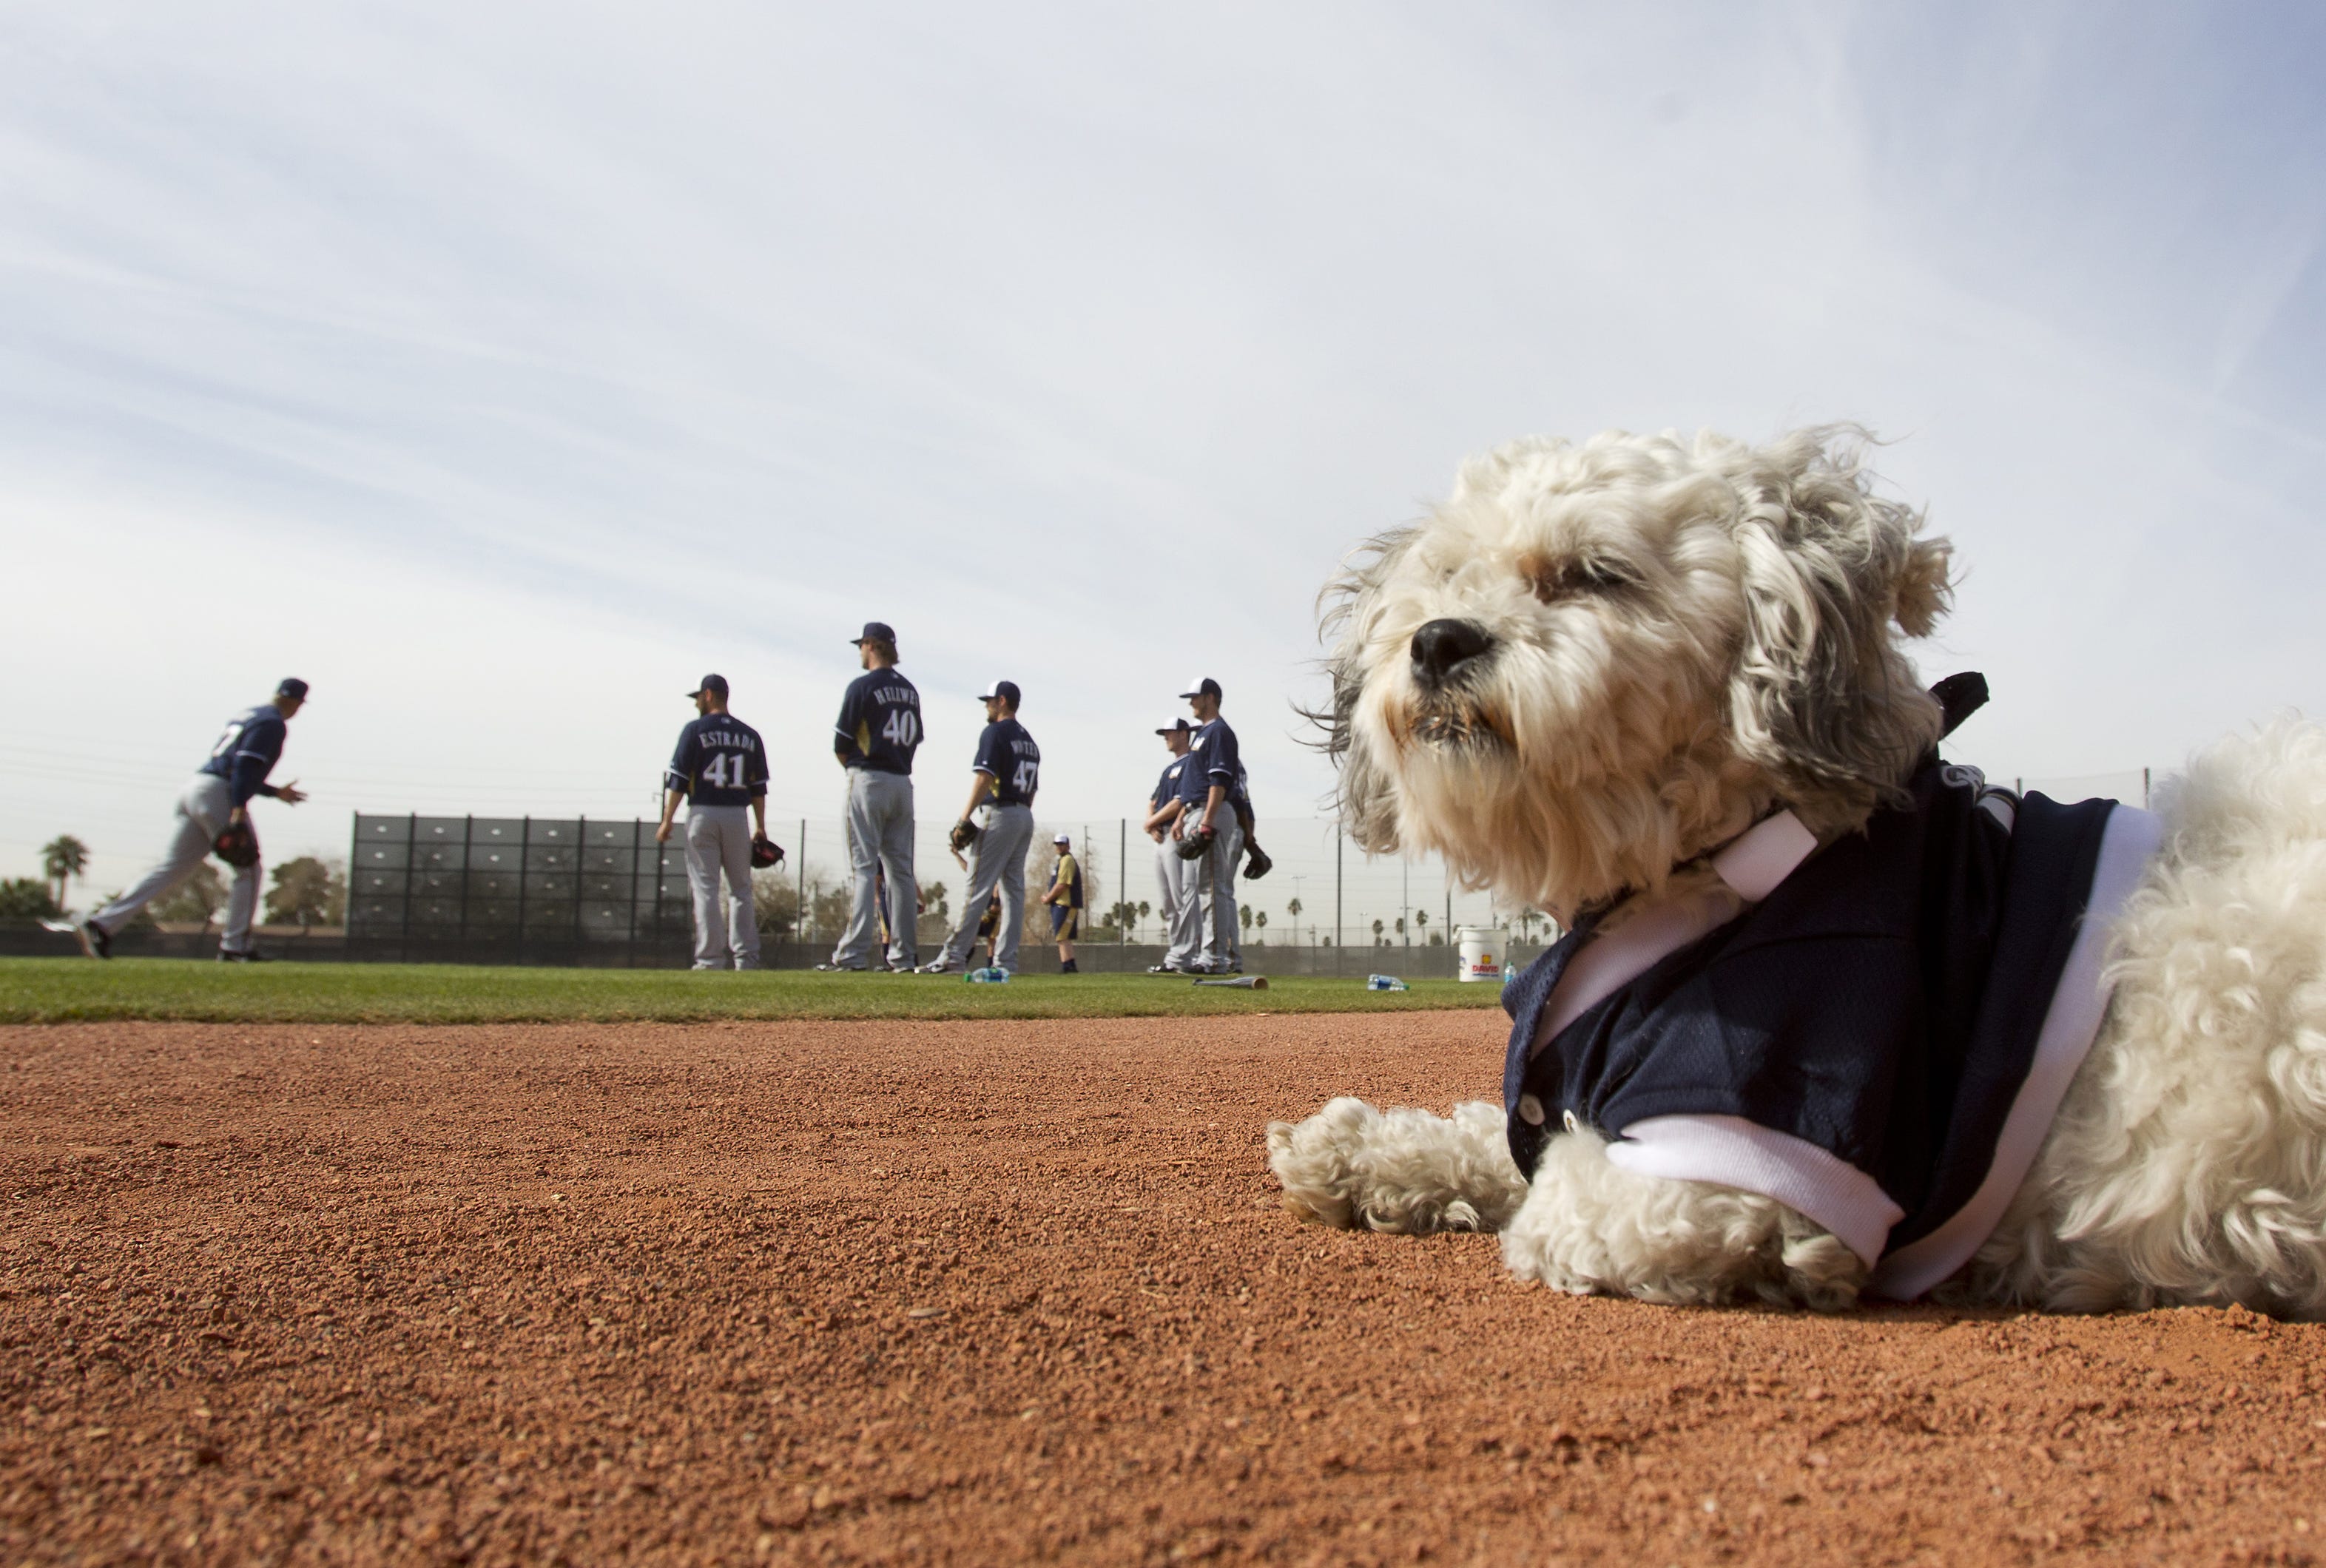 brewers dog jersey